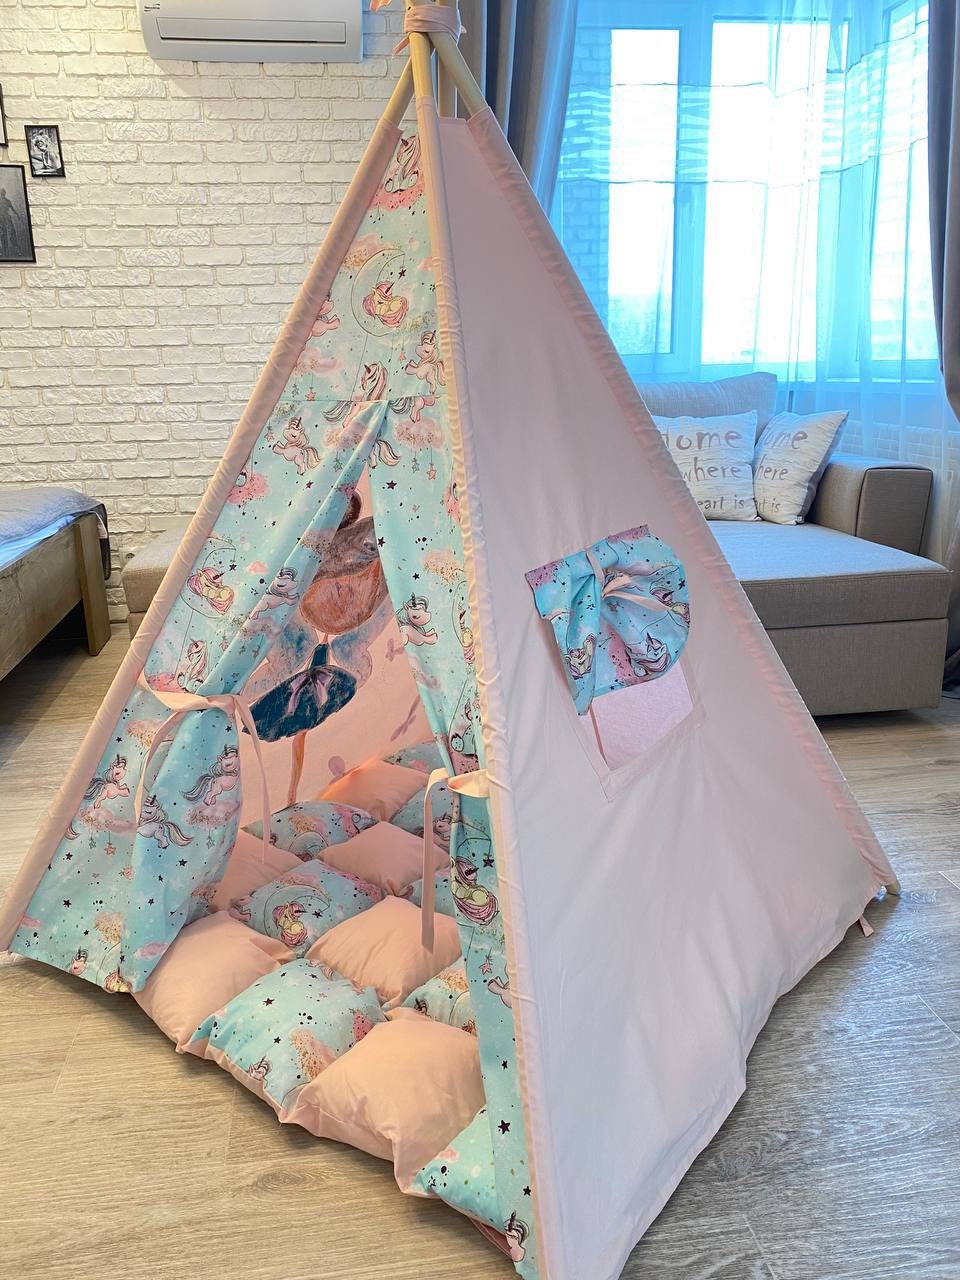 Original Toddler Teepee for girl with stabilizer active Game individual drawing and personalization according to your wishes Ideal Gift kids